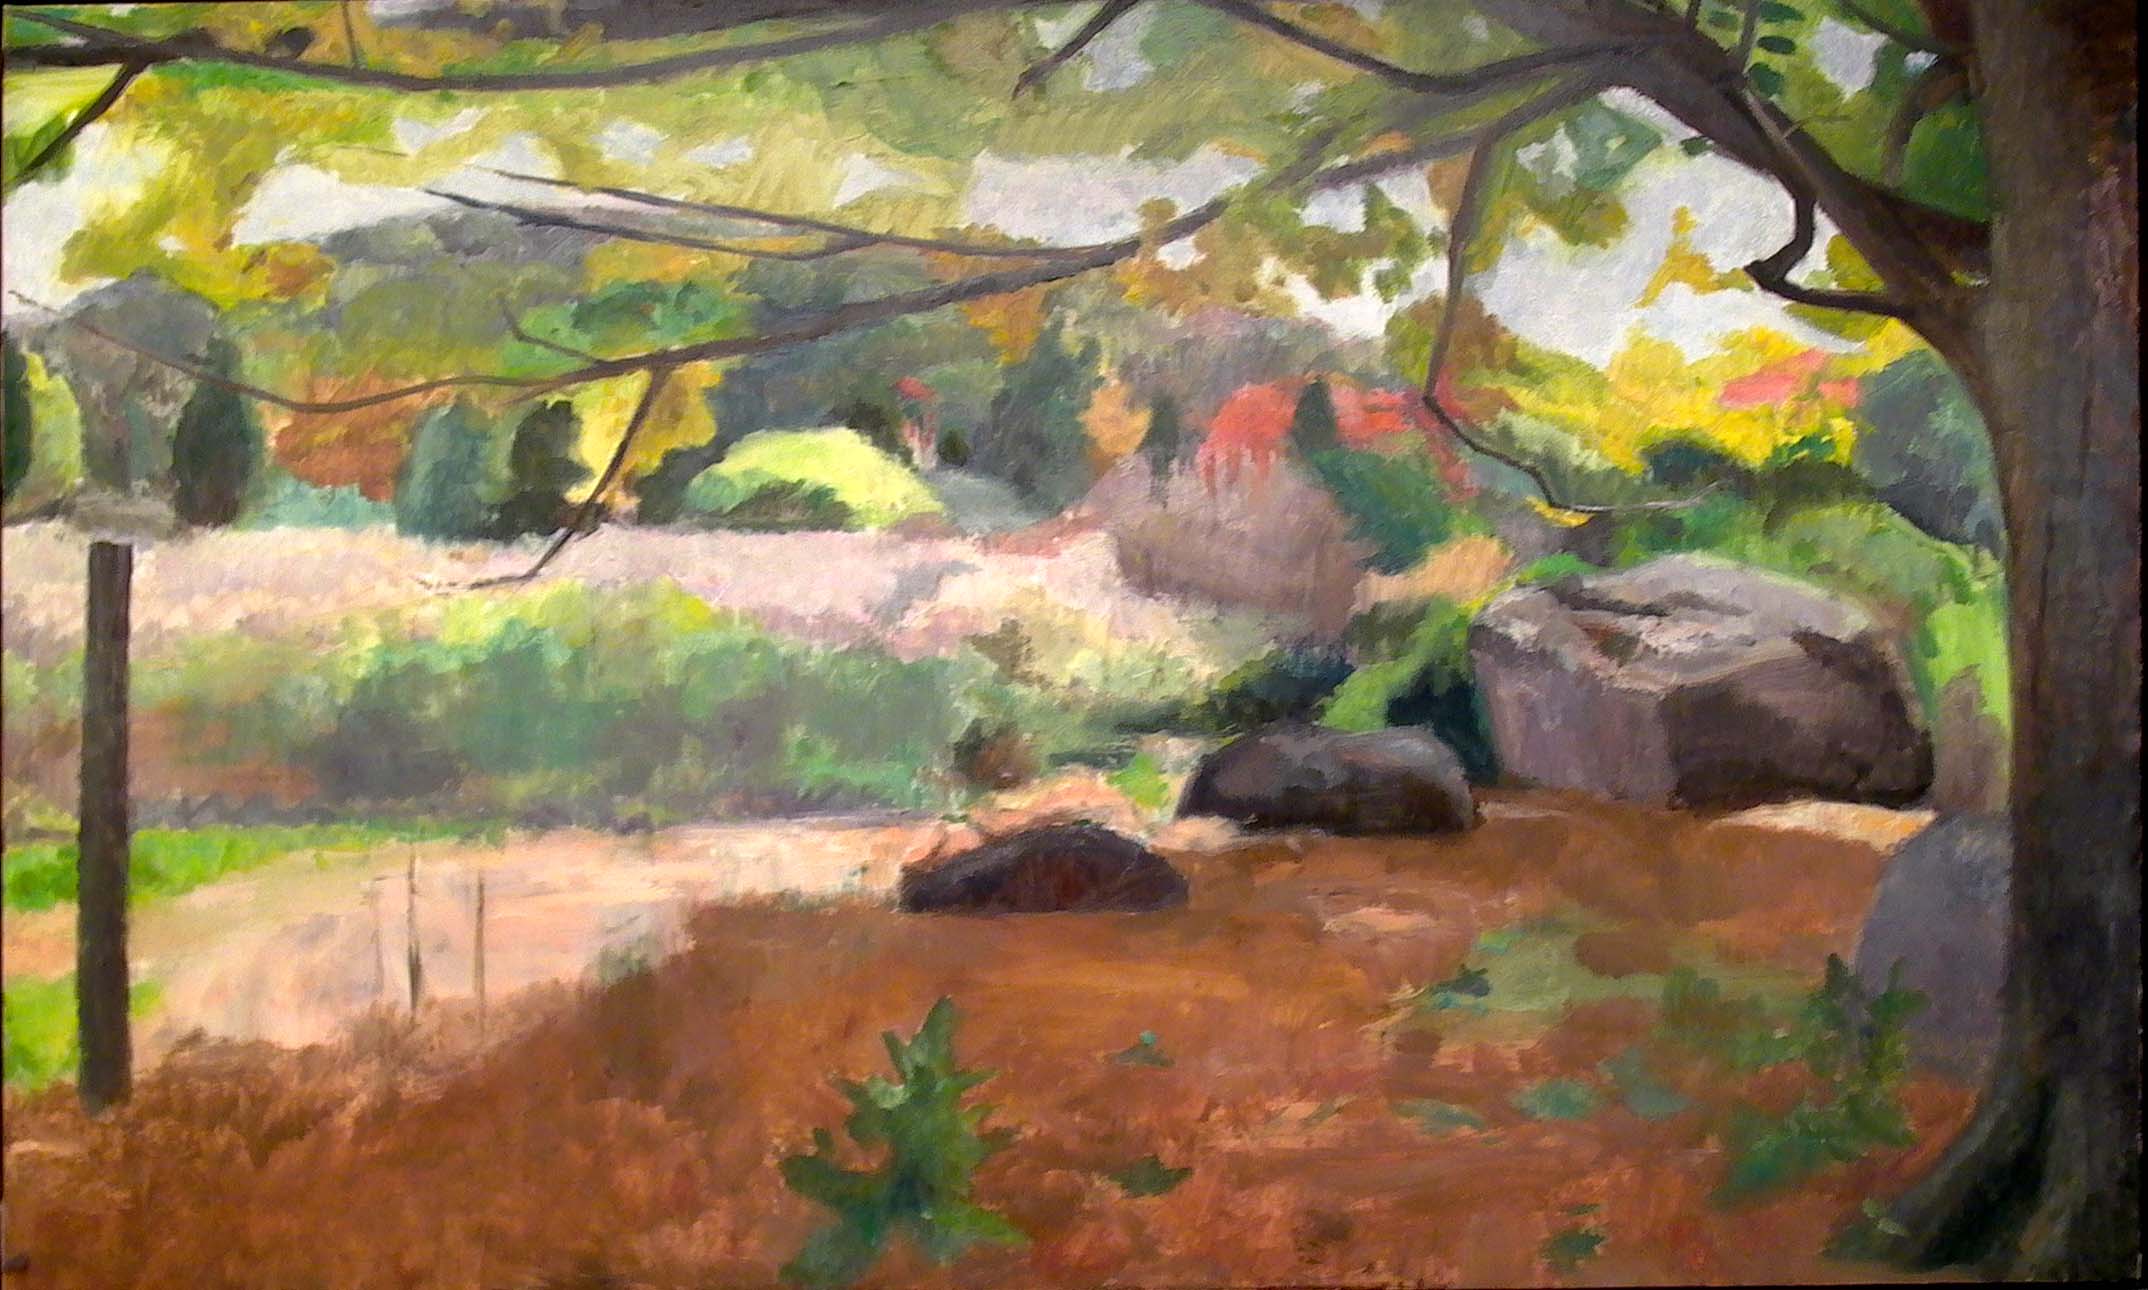 Behind the Studio, 26 x 42 inches, oil on linen, 2004.